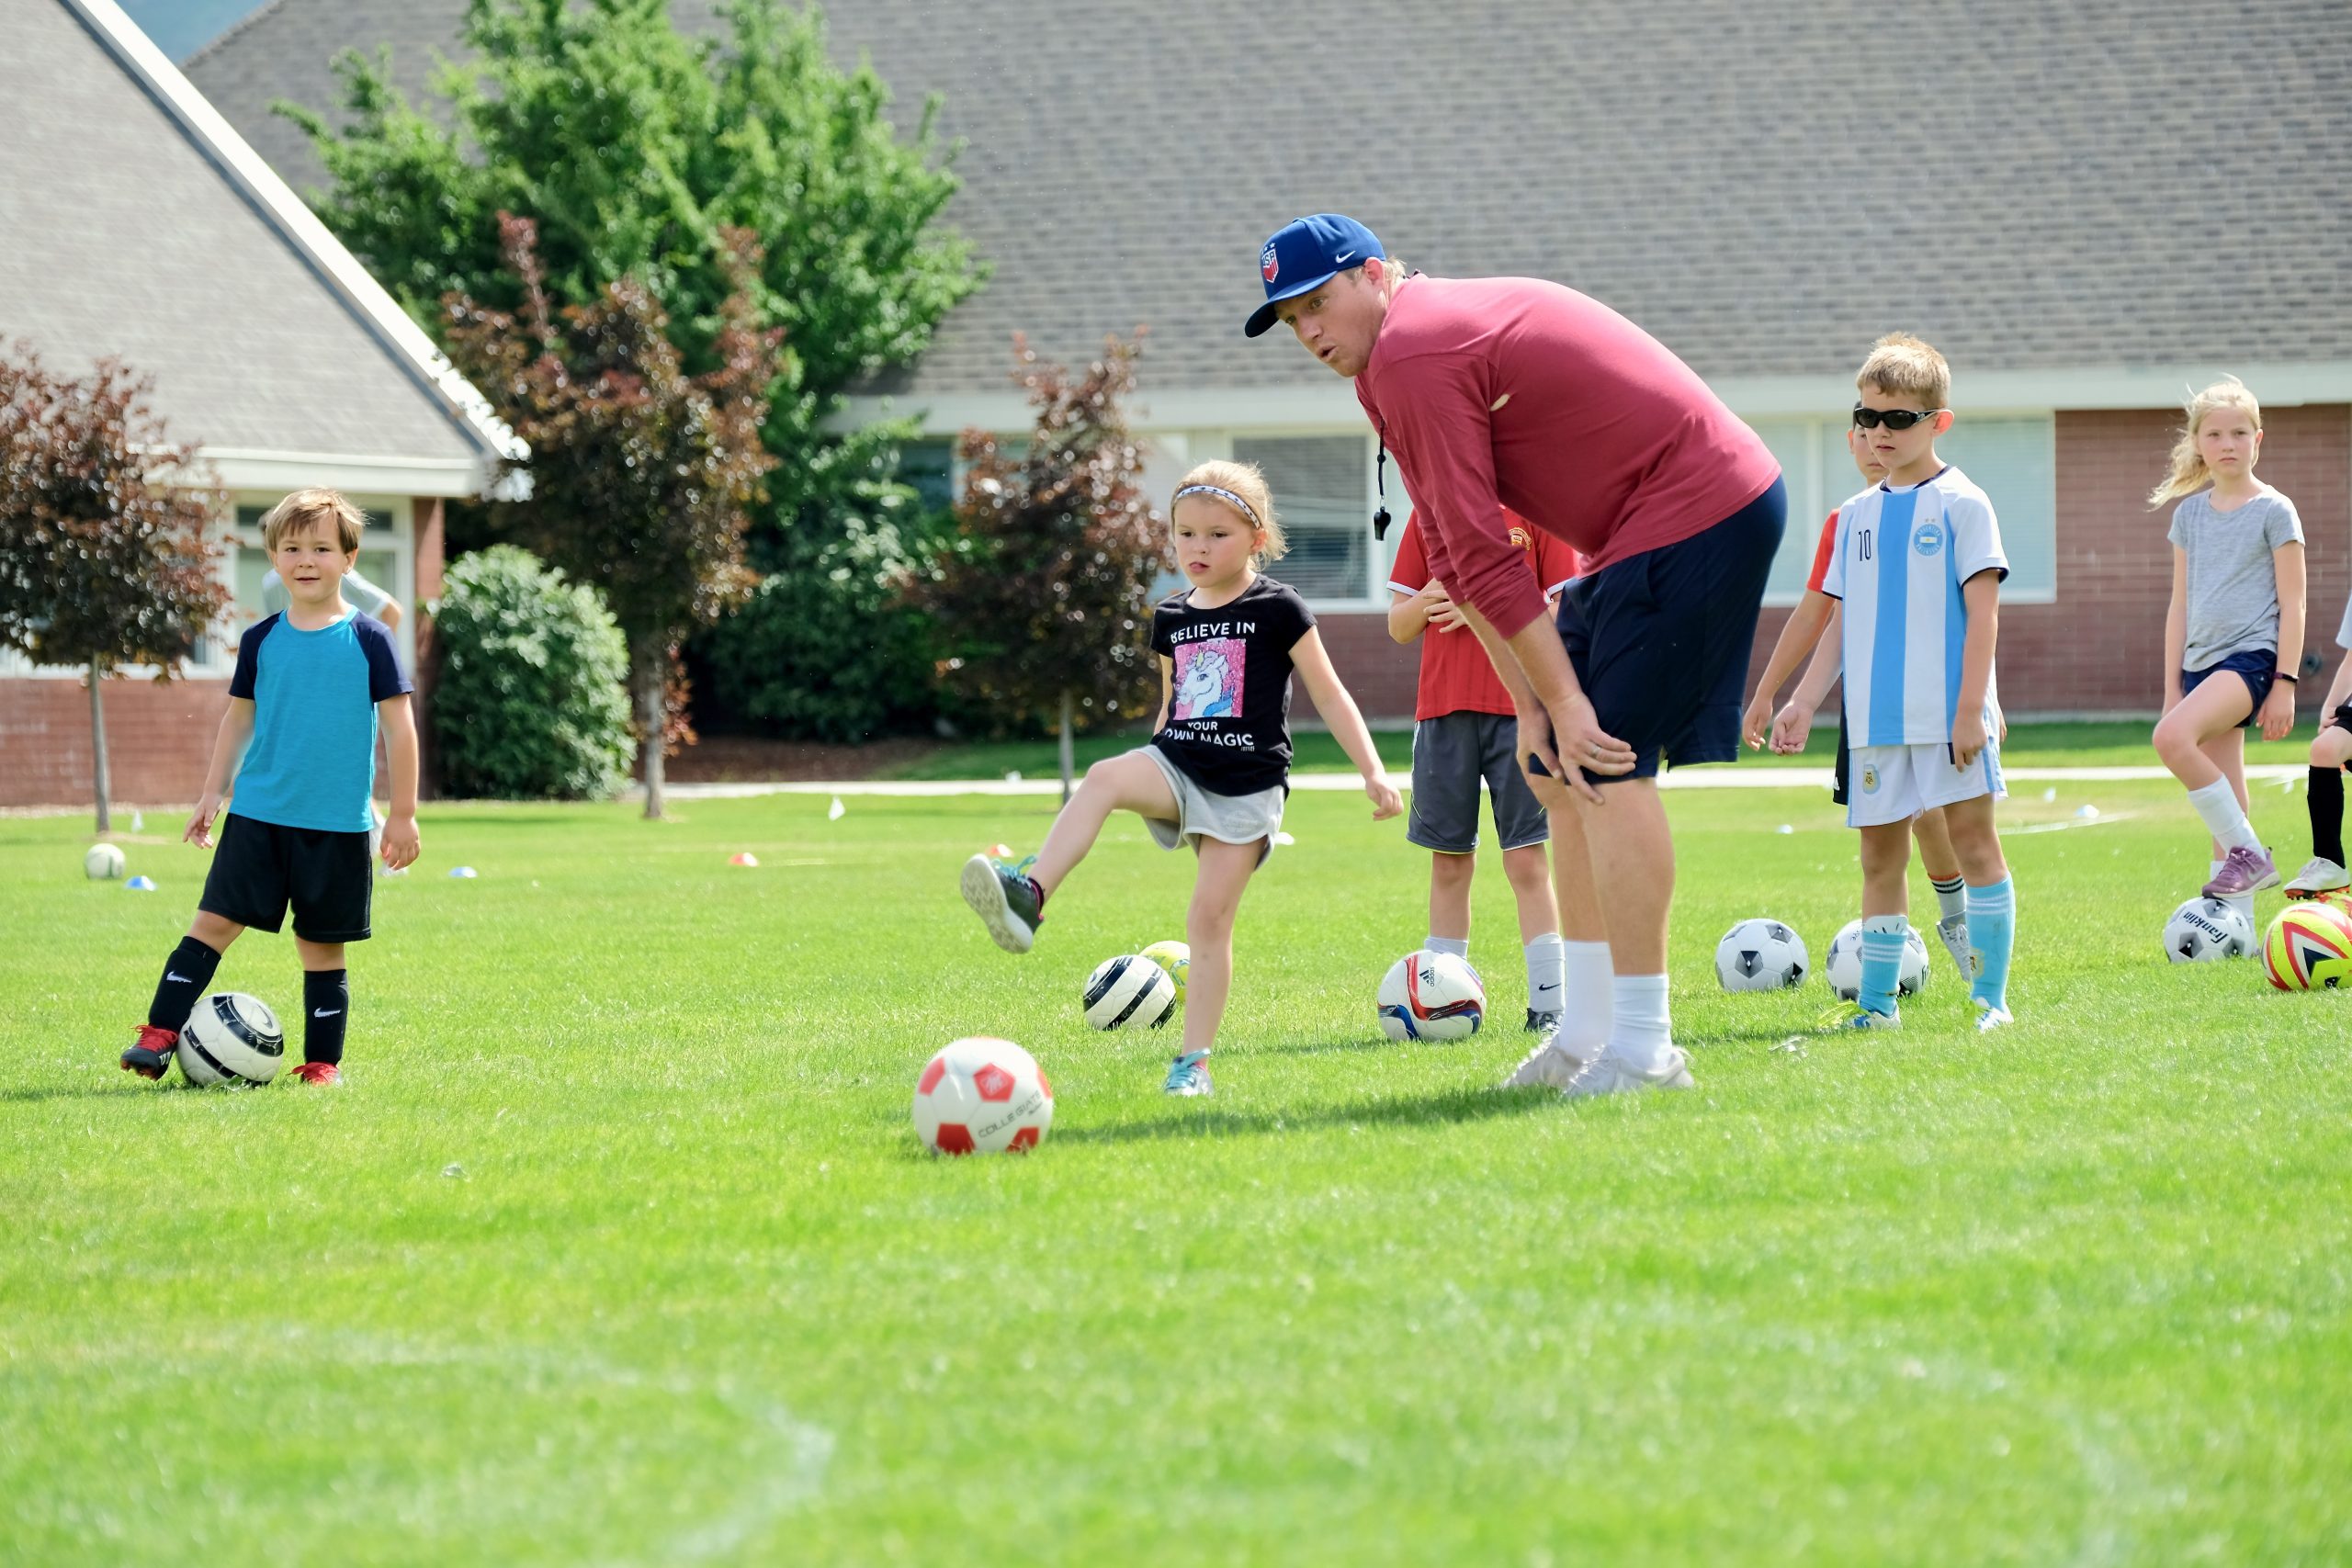 Young Soccer campers